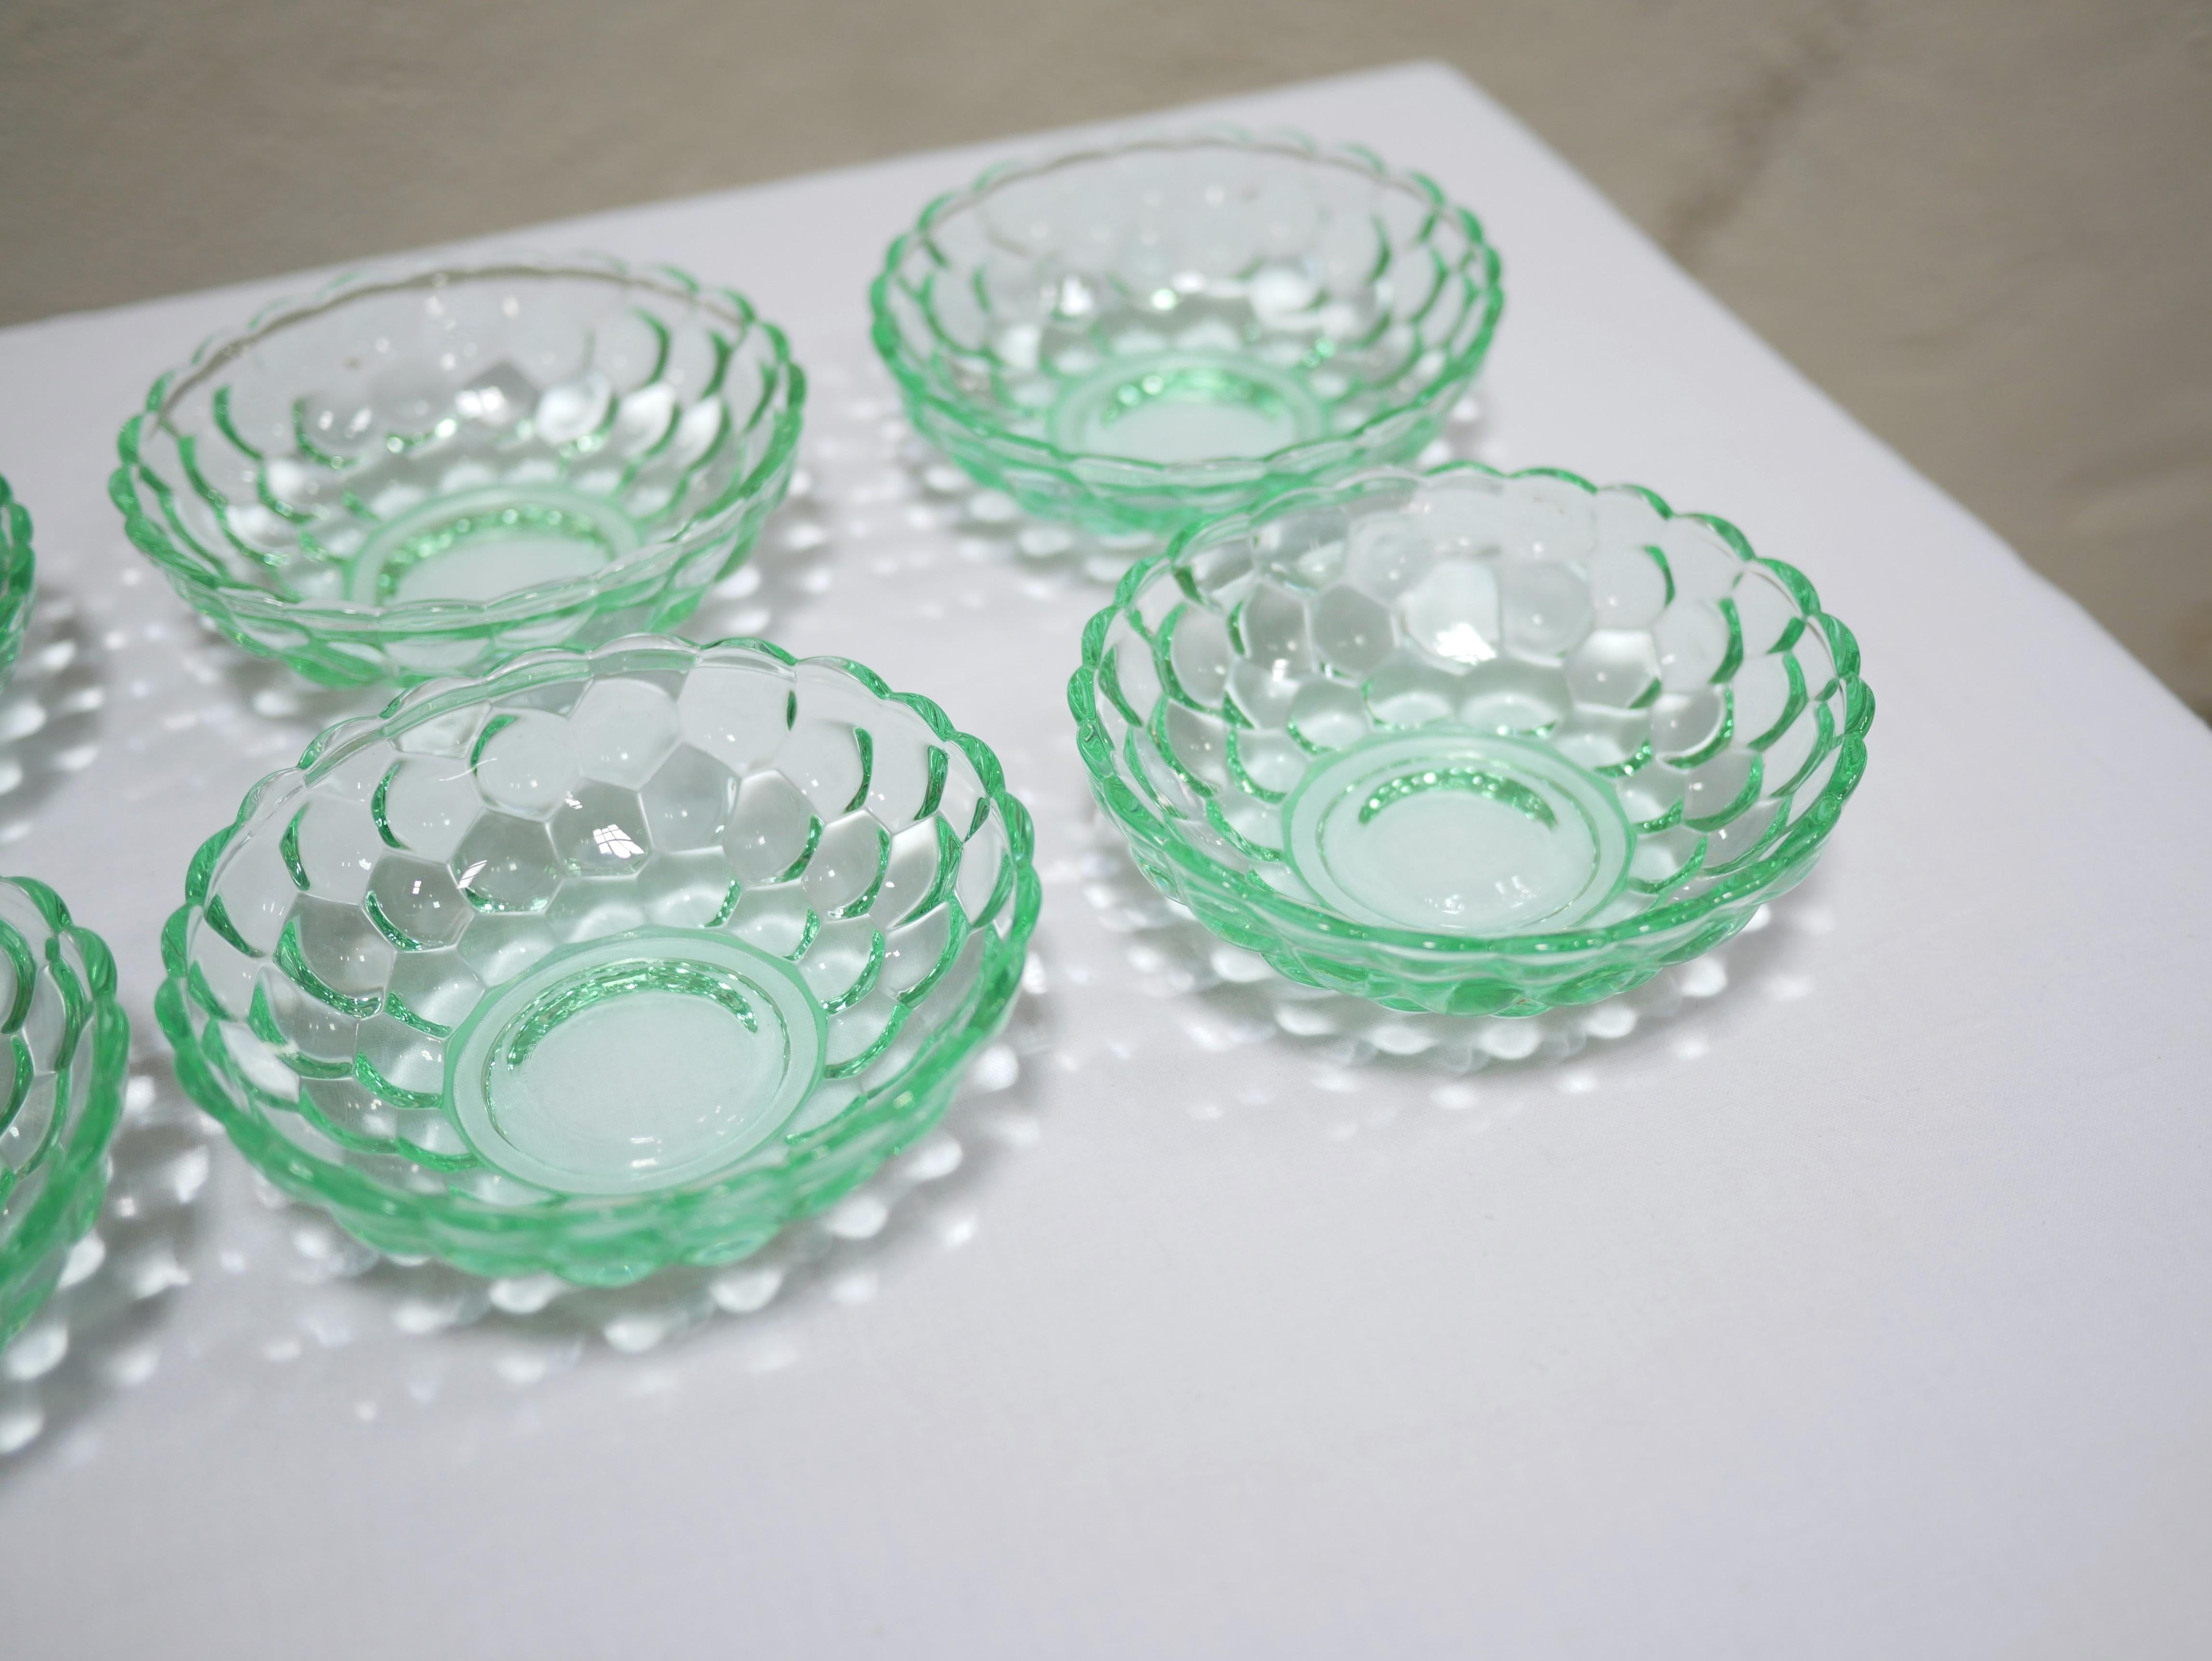 Crystal dessert service consisting of a goblet and 6 cups, 